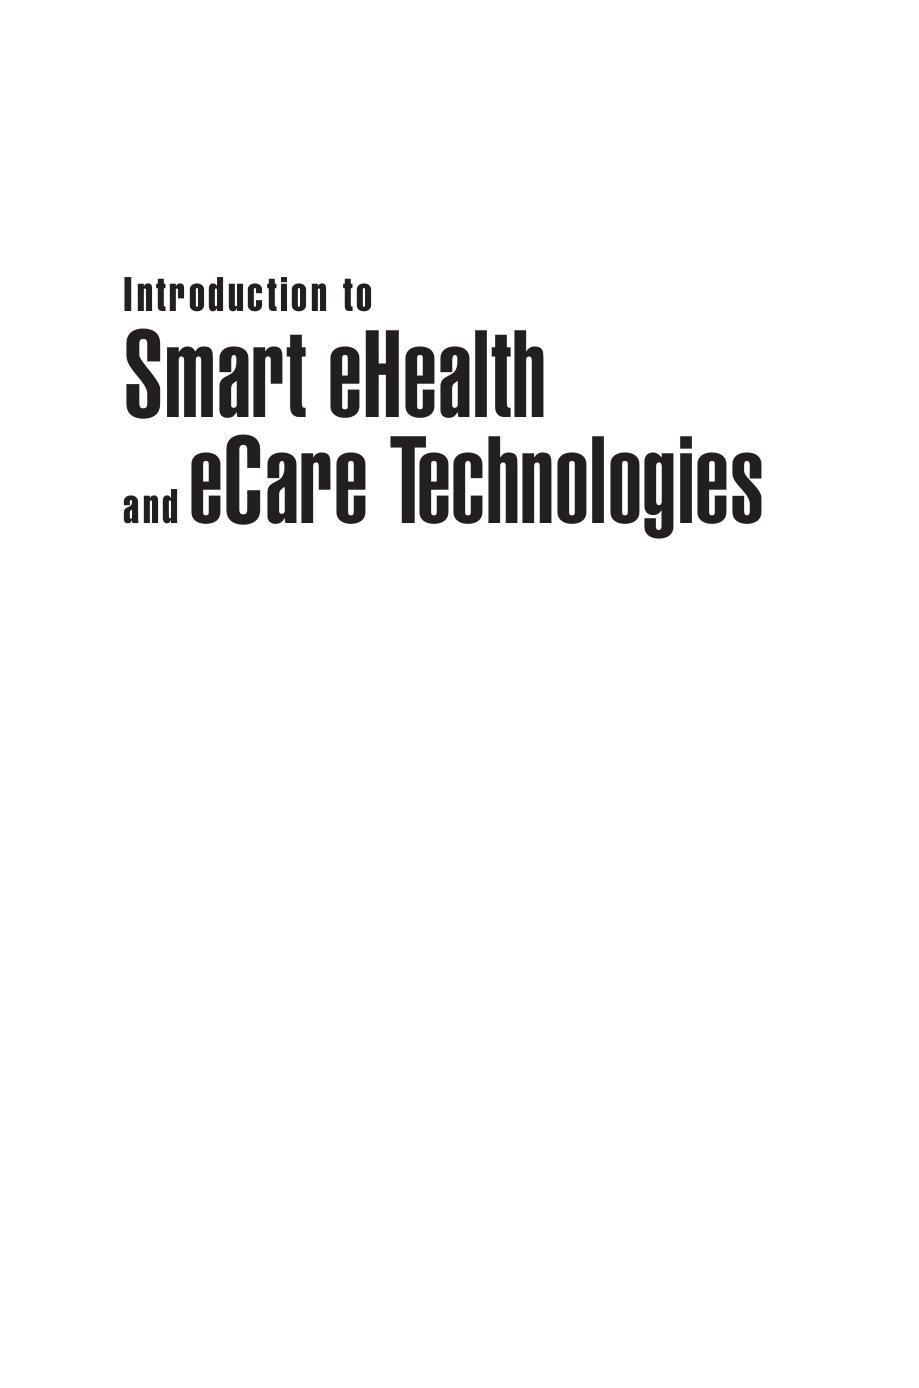 Introduction to smart eHealth and eCare technologies 2017